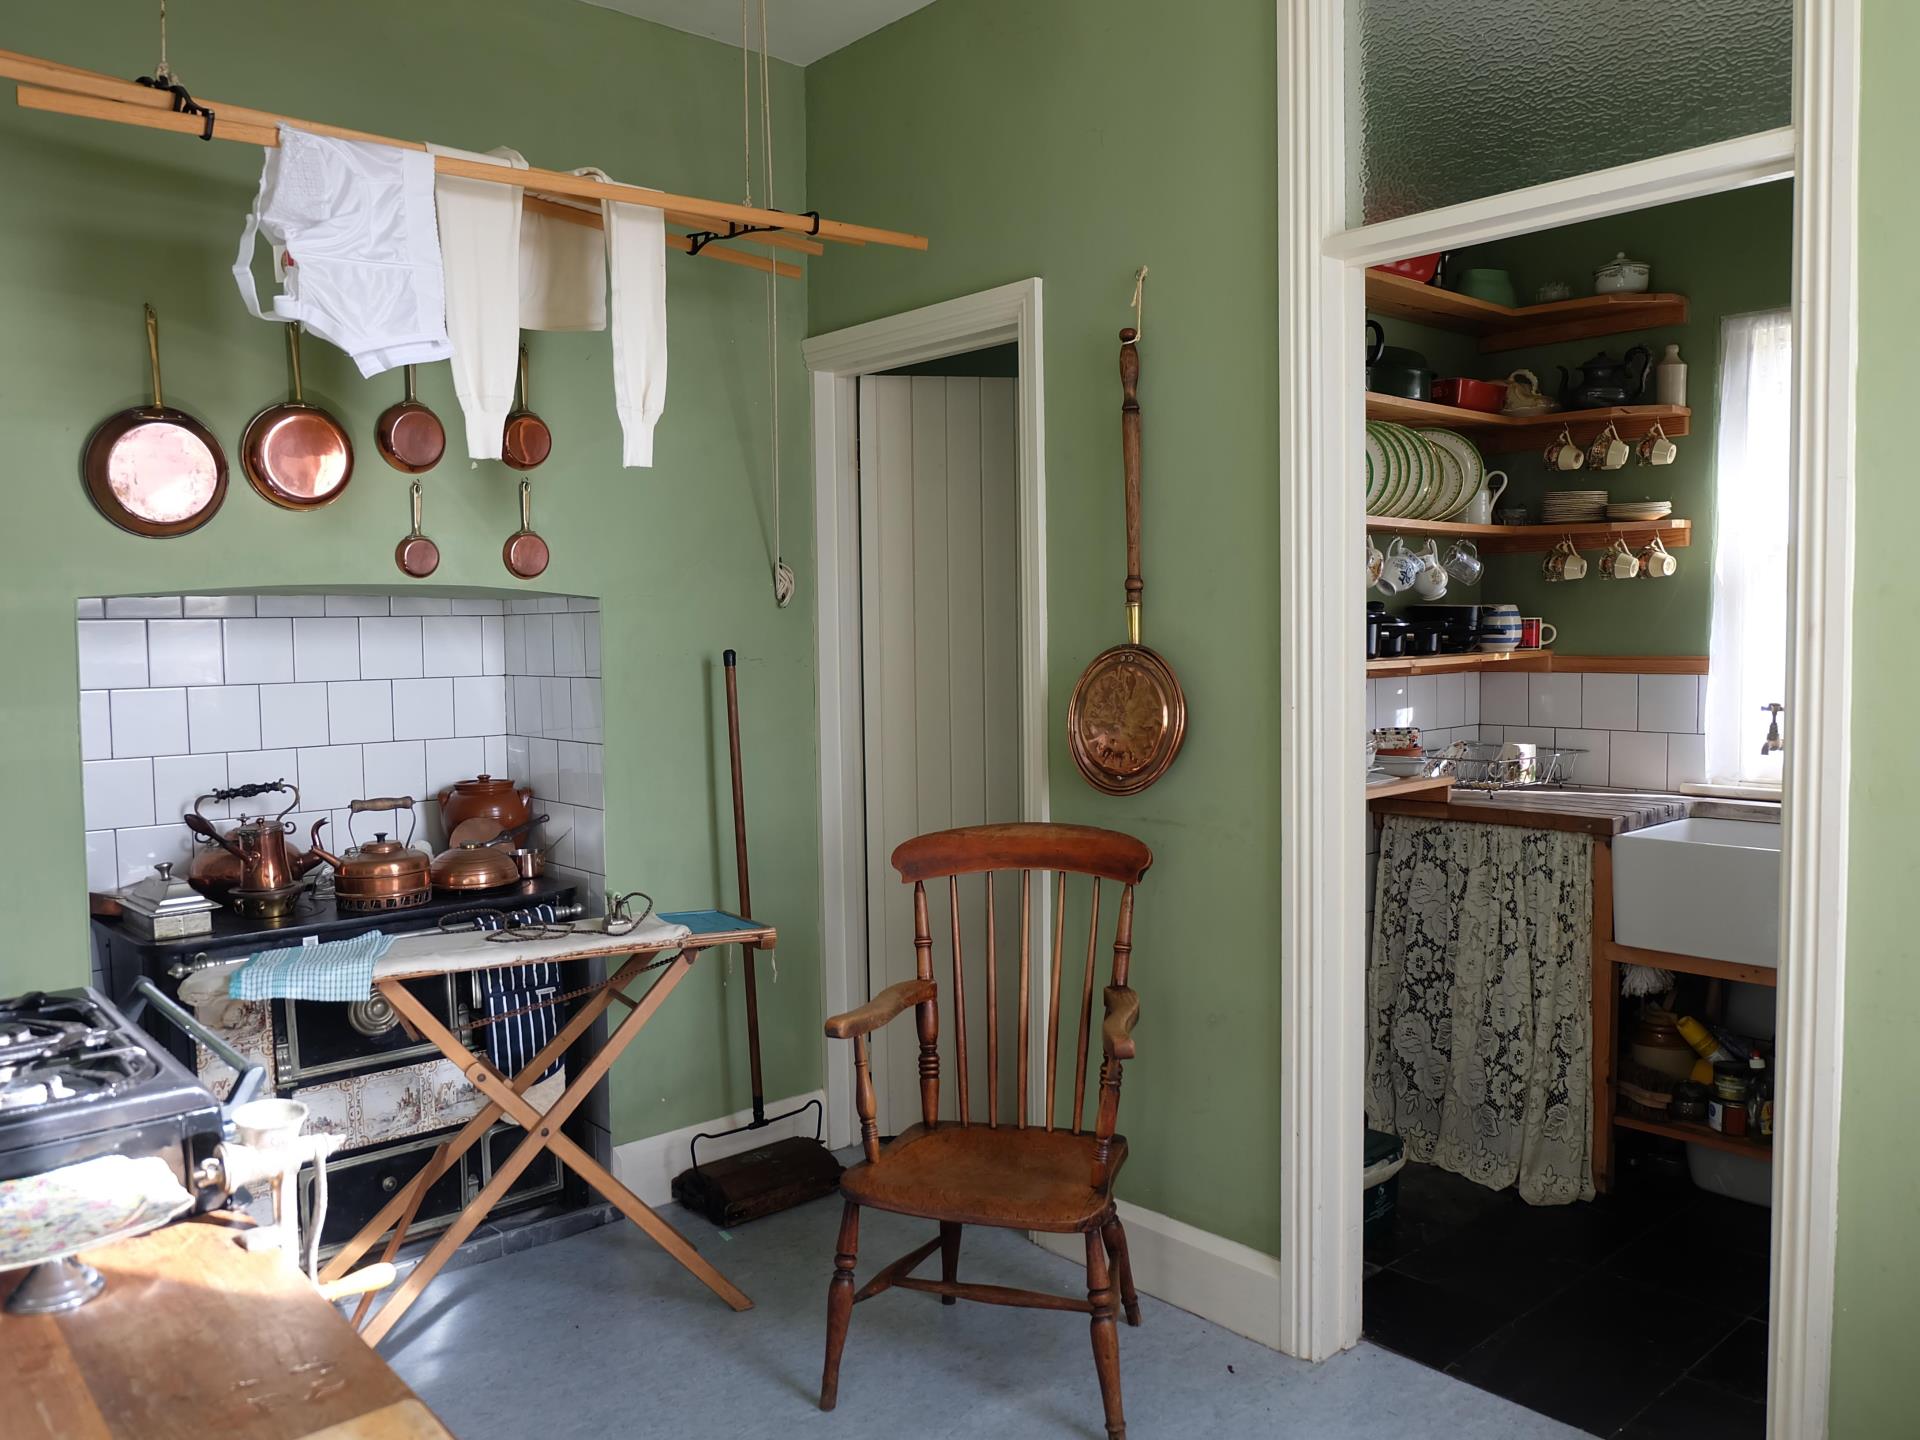 Step back in time in the kitchen